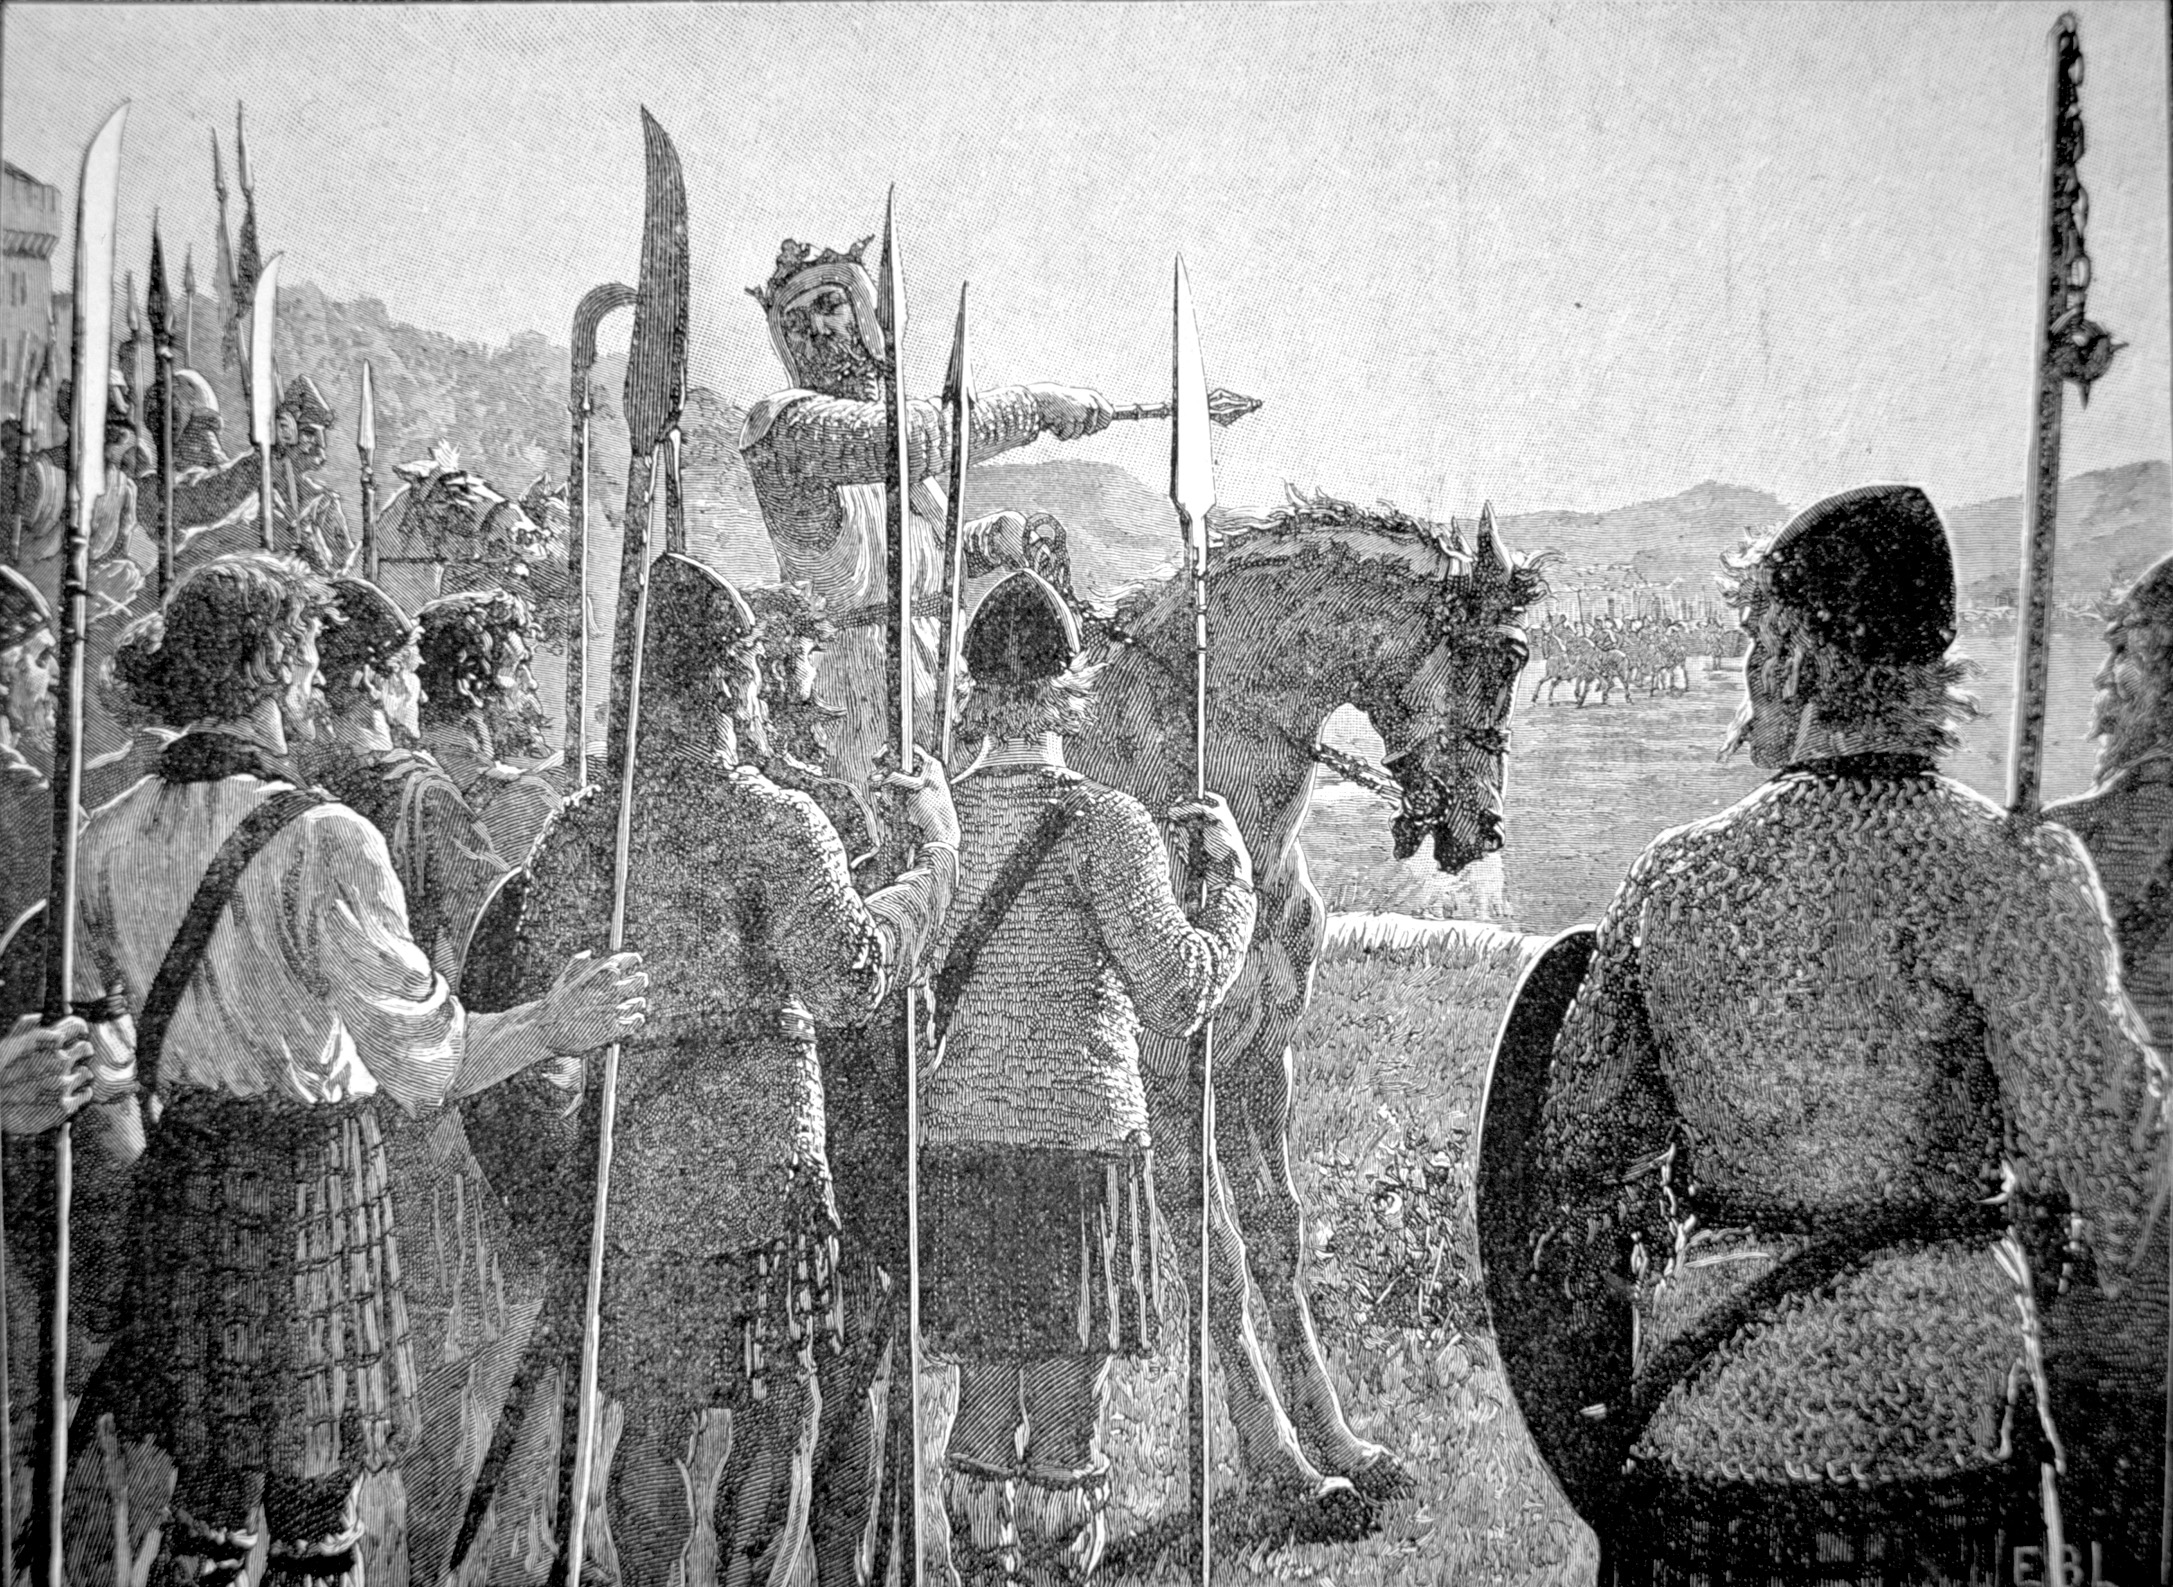 Robert the Bruce giving orders to his troops before the battle.